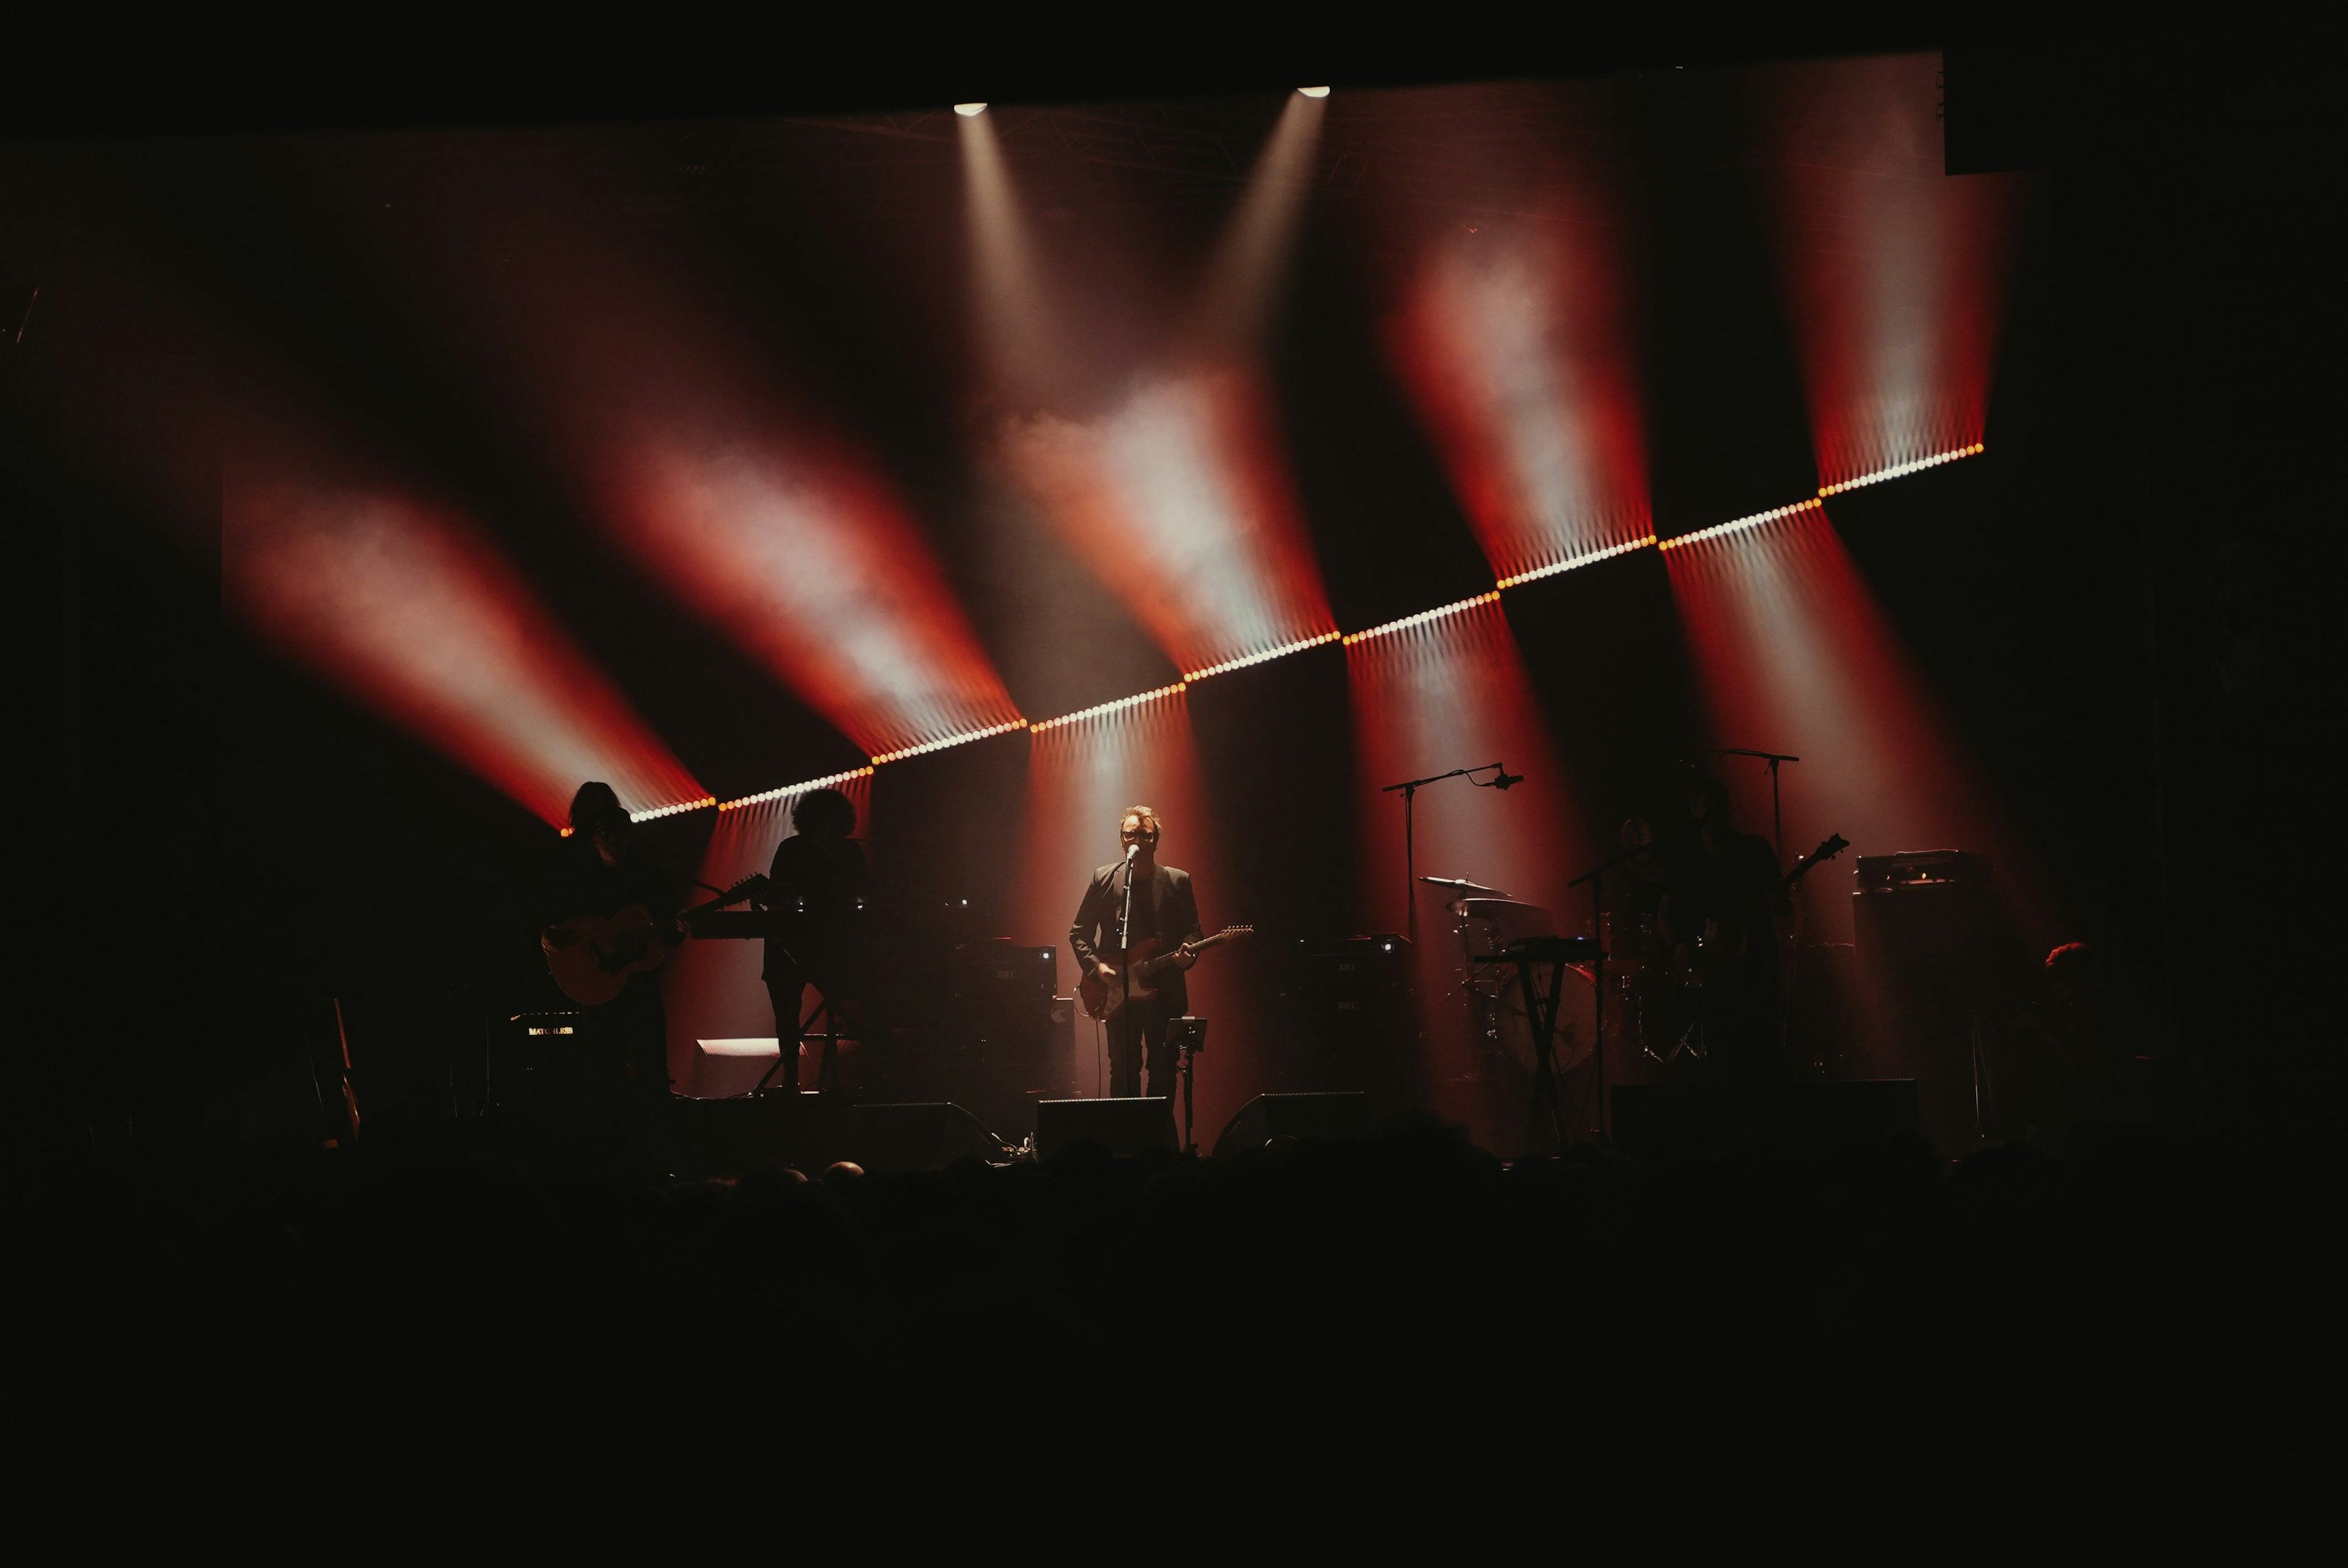 Axel Bauer concert at Trianon in 2022, stage design, light design